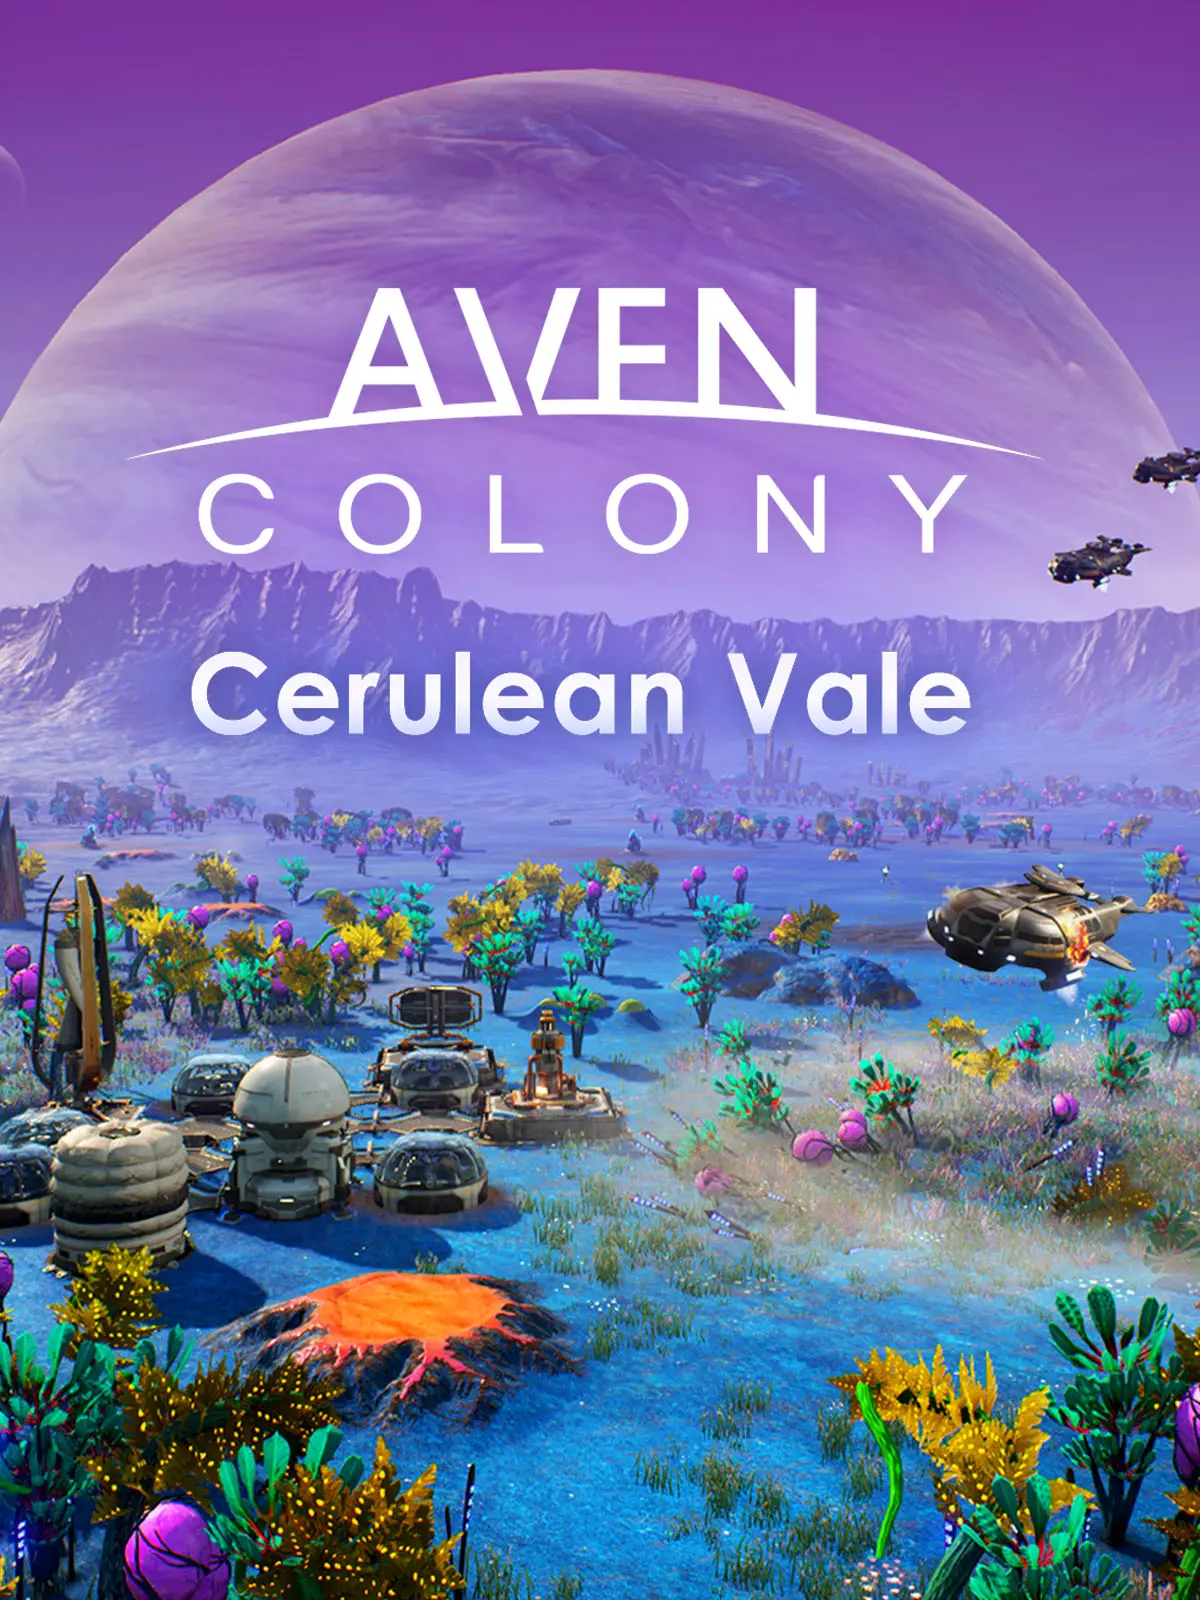 Aven Colony - Cerulean Vale (PC) - Steam - Digital Code